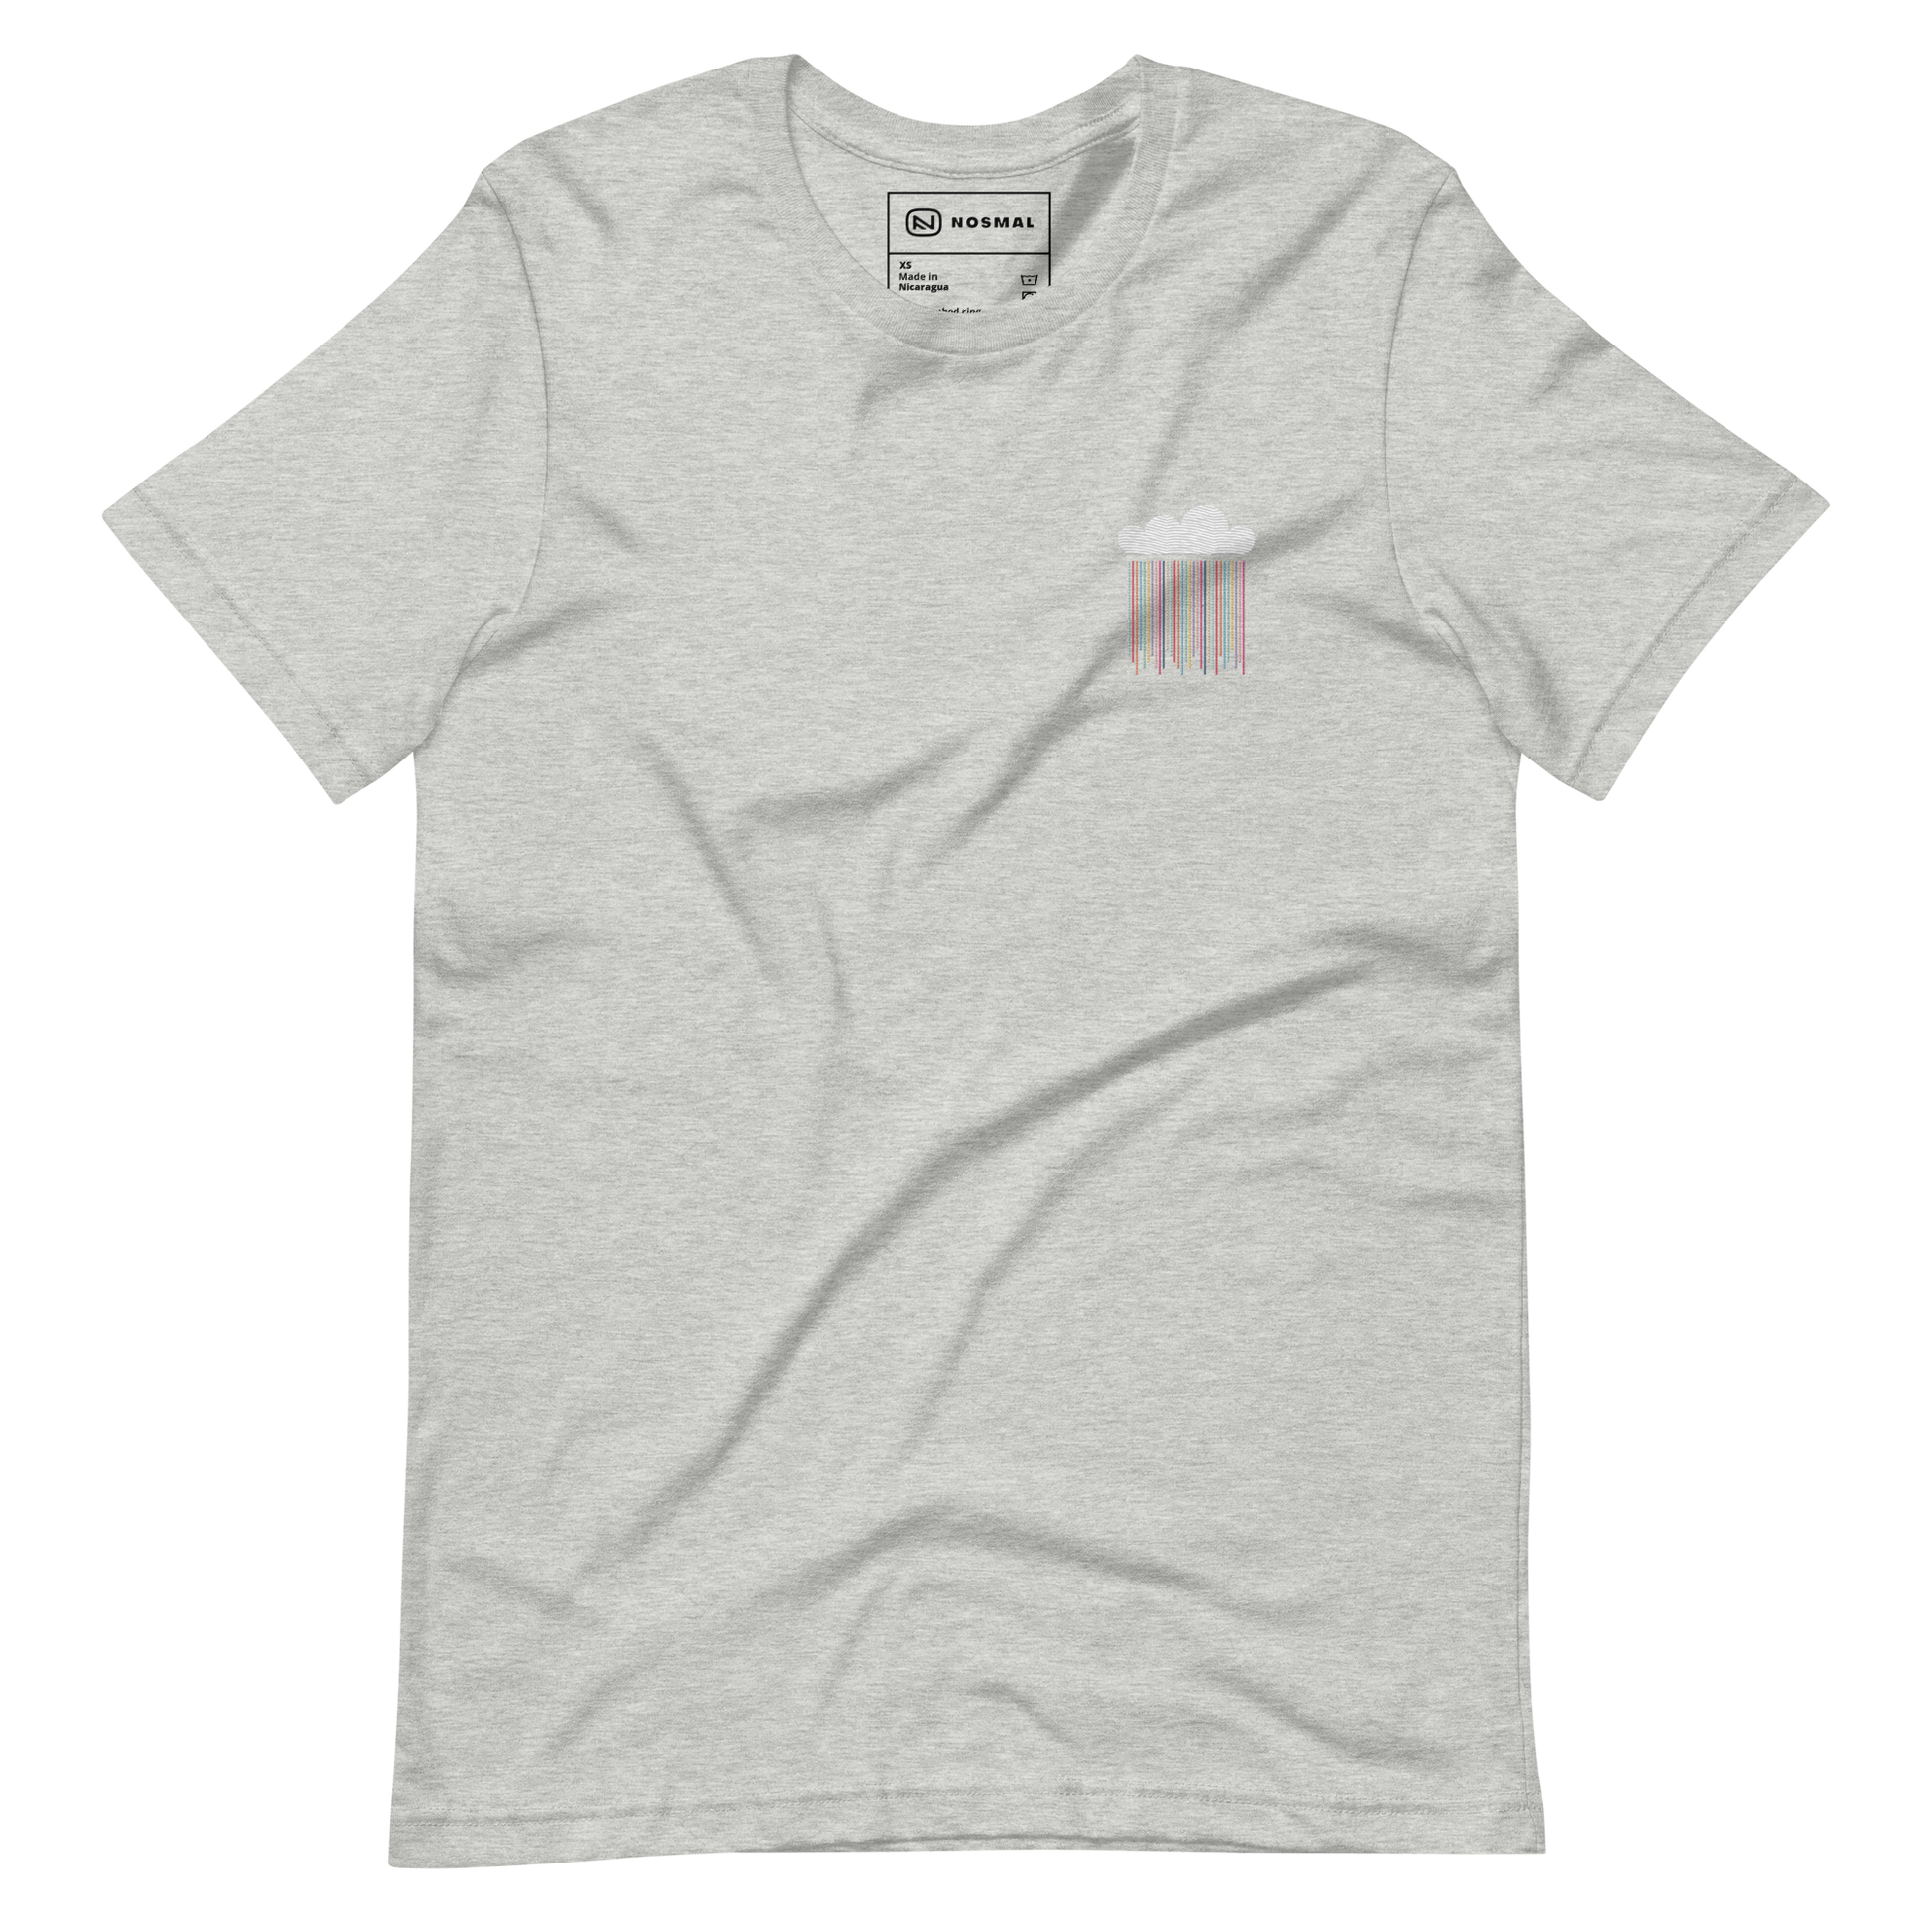 Straight on view of prism rain embroidered design on heather athletic grey unisex t-shirt.